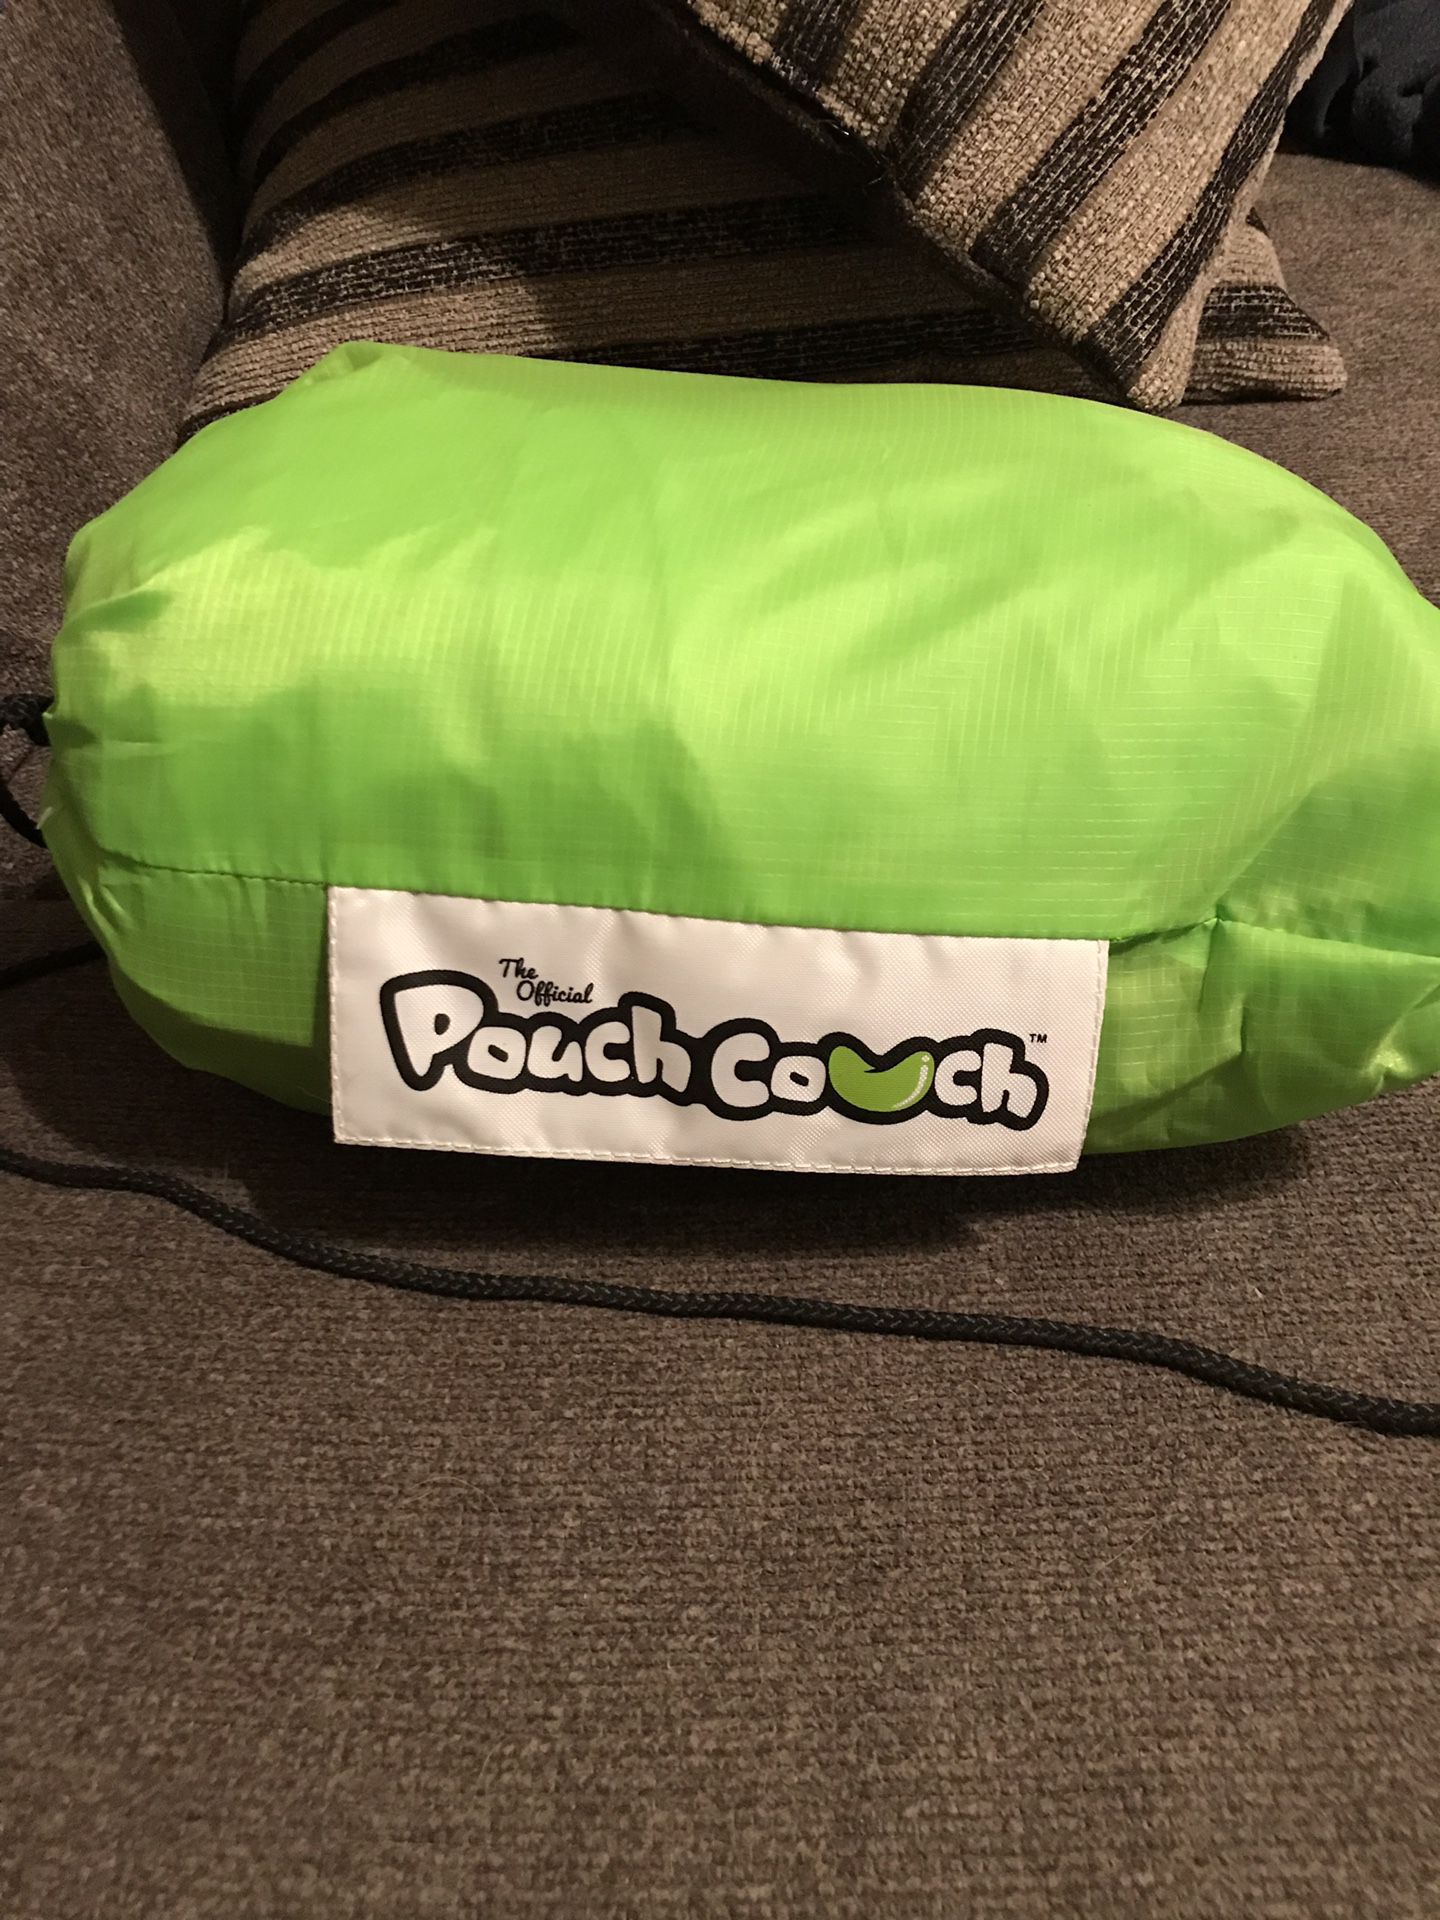 Pouch Couch